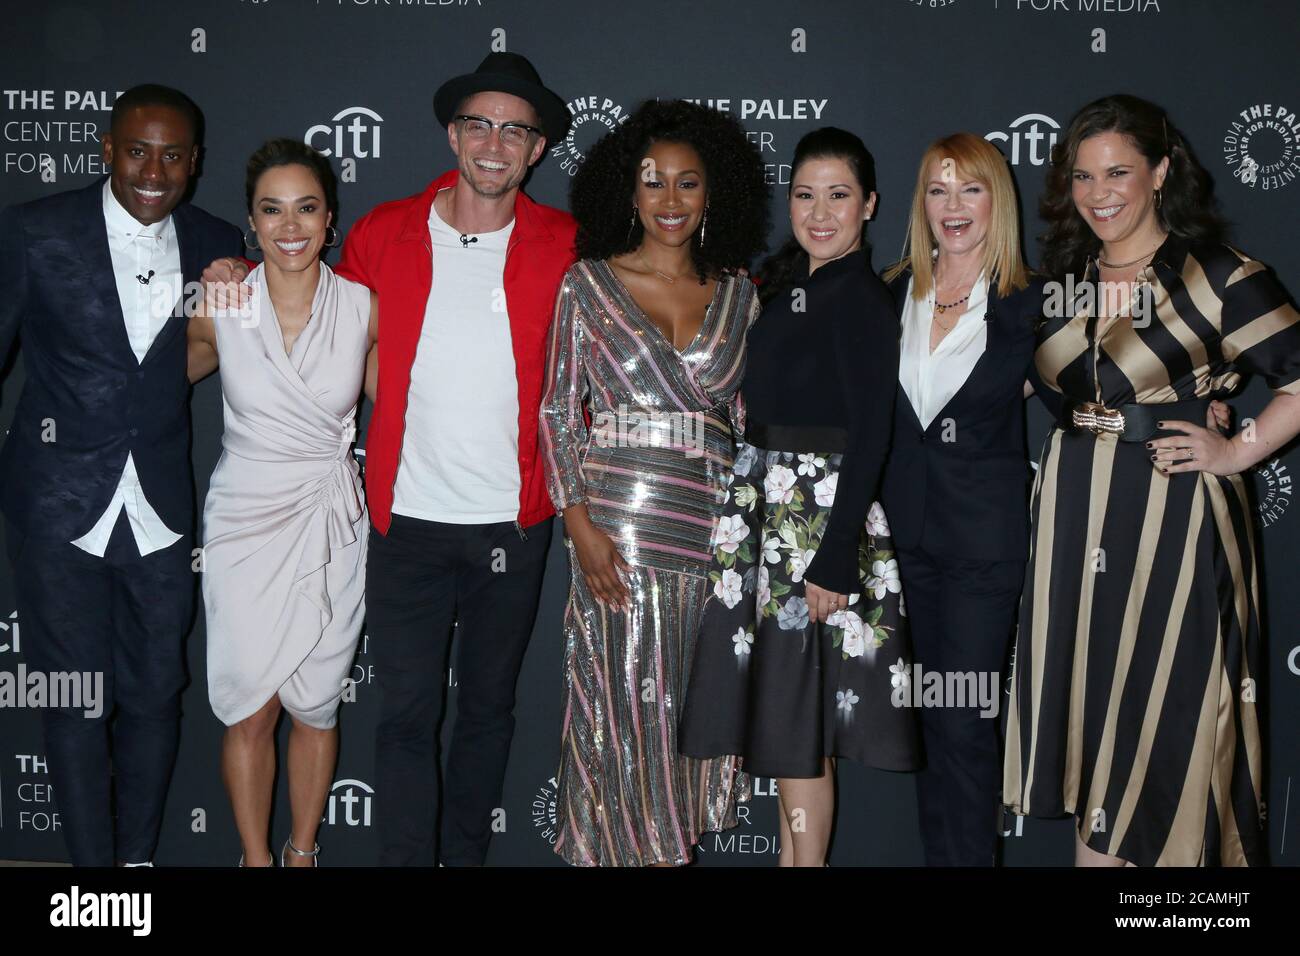 LOS ANGELES - SEP 12:  All Rise Cast, J. Alex Brinson, Jessica Camacho, Wilson Bethel, Simone Missick, Ruthie Ann Miles, Marg Helgenberger, Lindsay Mendez at the 2019 PaleyFest Fall TV Previews - CBS at the Paley Center for Media on September 12, 2019 in Beverly Hills, CA Stock Photo